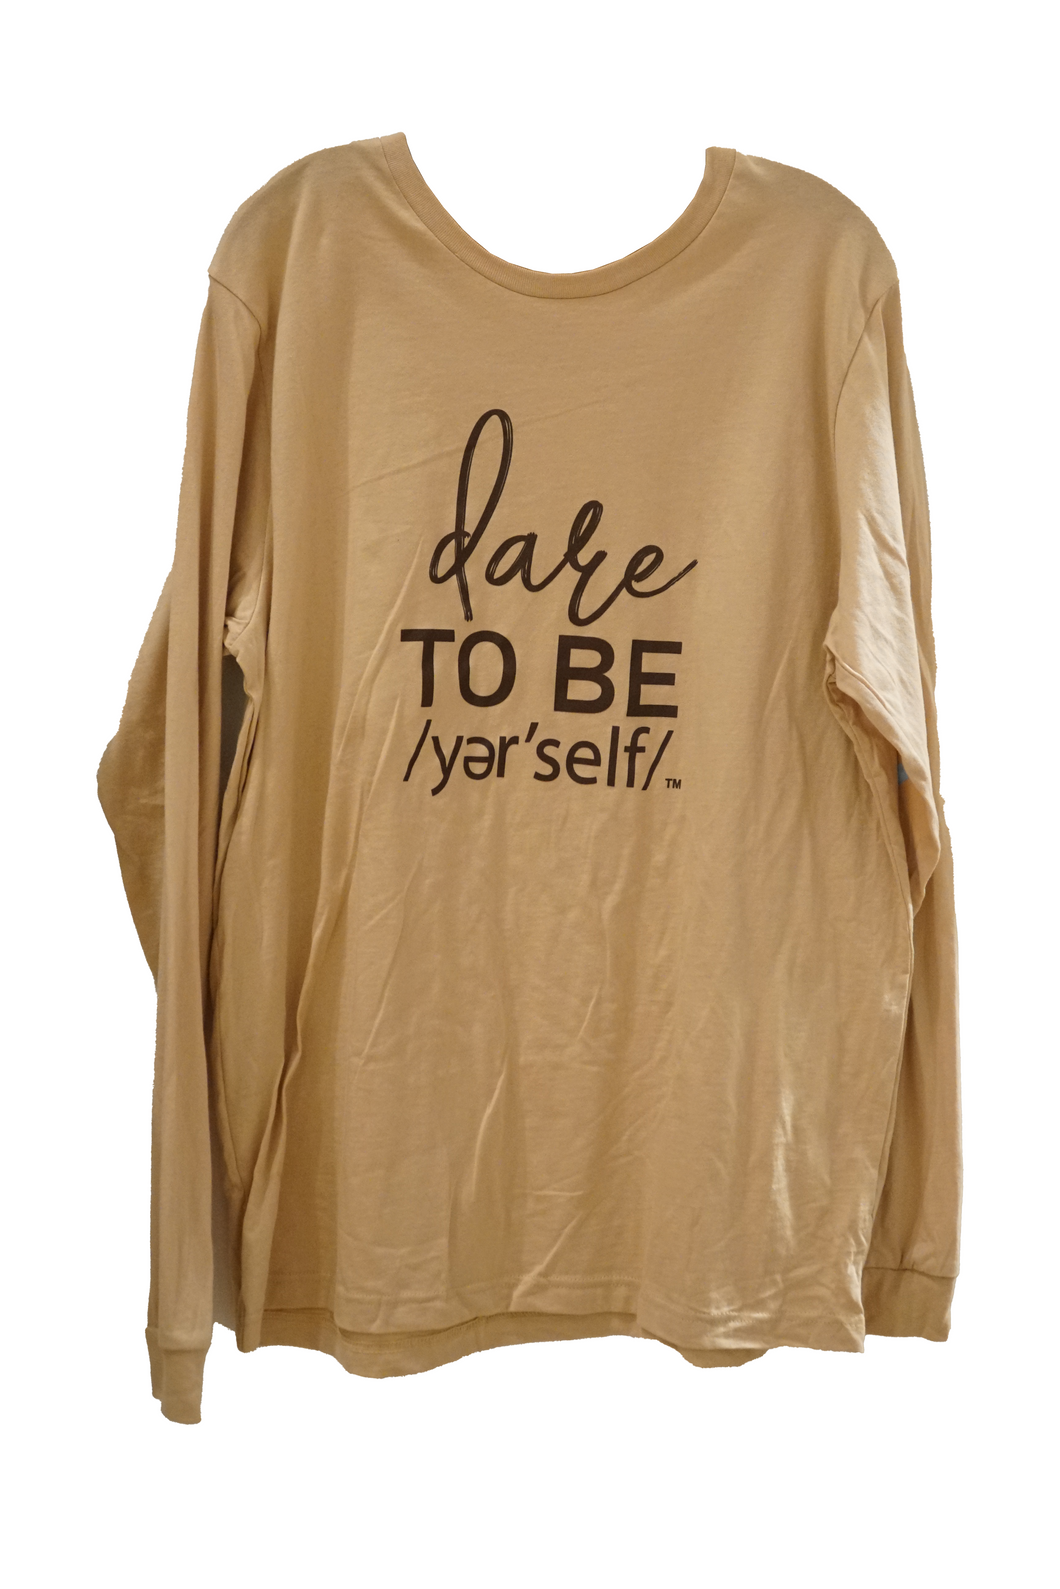 BEIGE LONG SLEEVE TEE WITH DTB YER'SELF